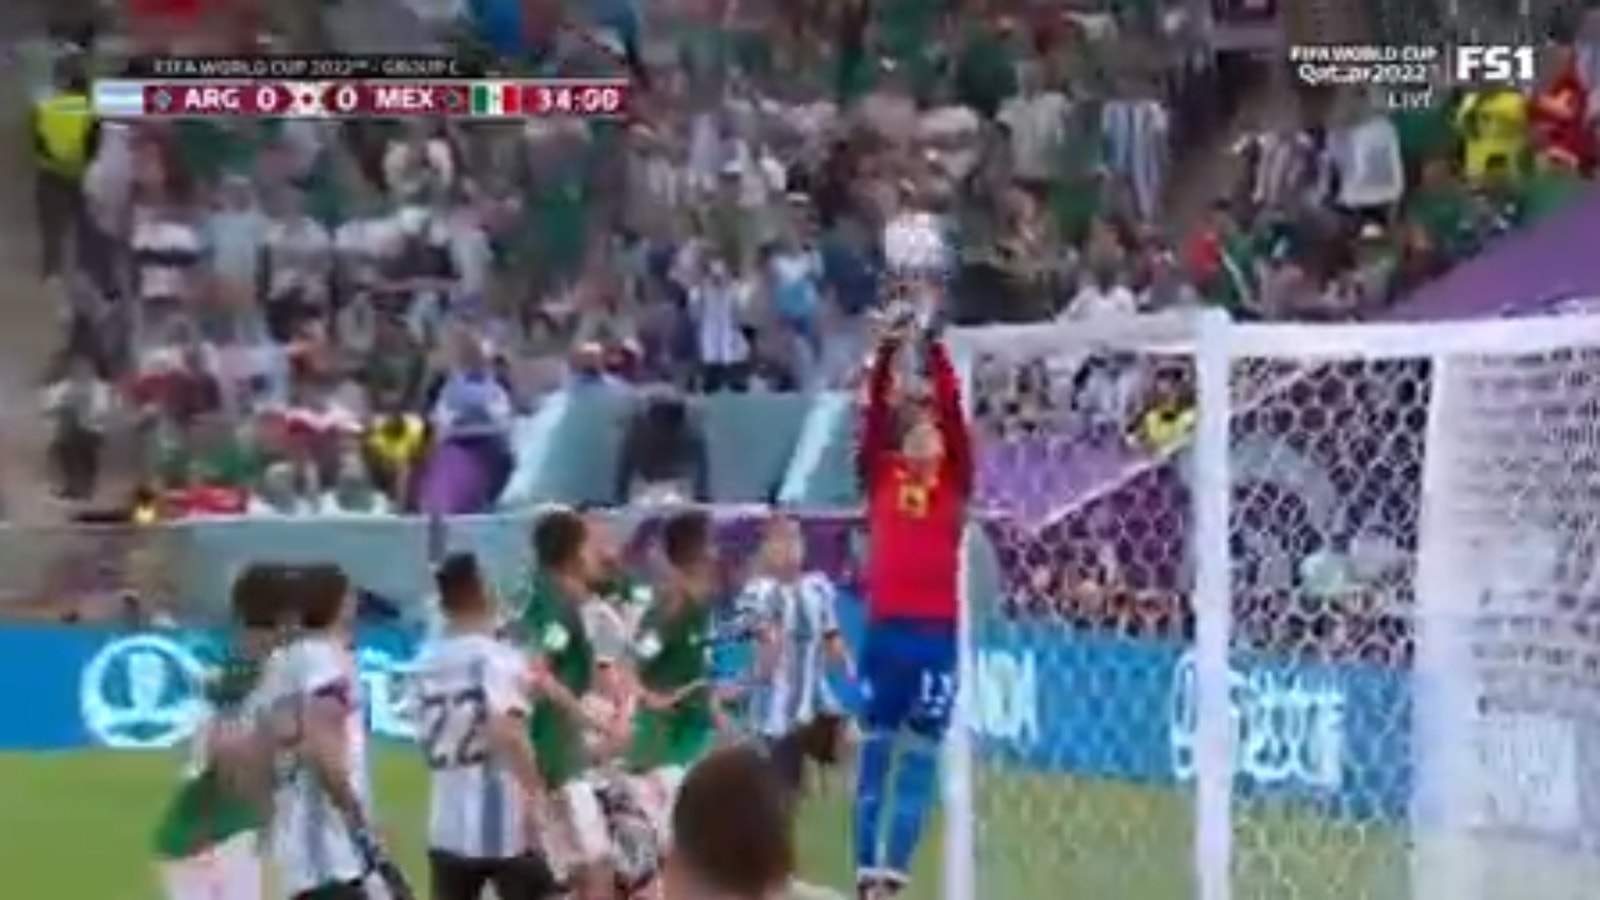 Argentina's Lionel Messi was punched away by Ochoa on the verge of scoring his first goal of the match.